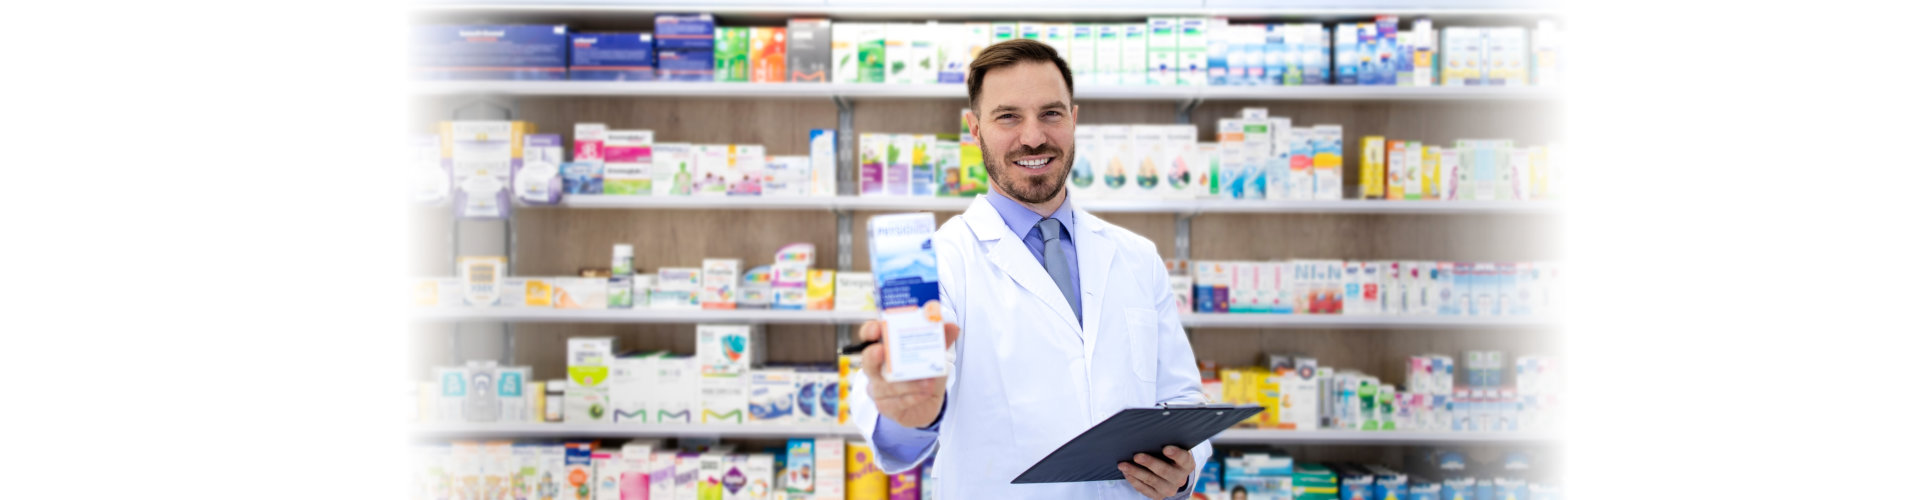 male pharmacist standing at the drugstore counter